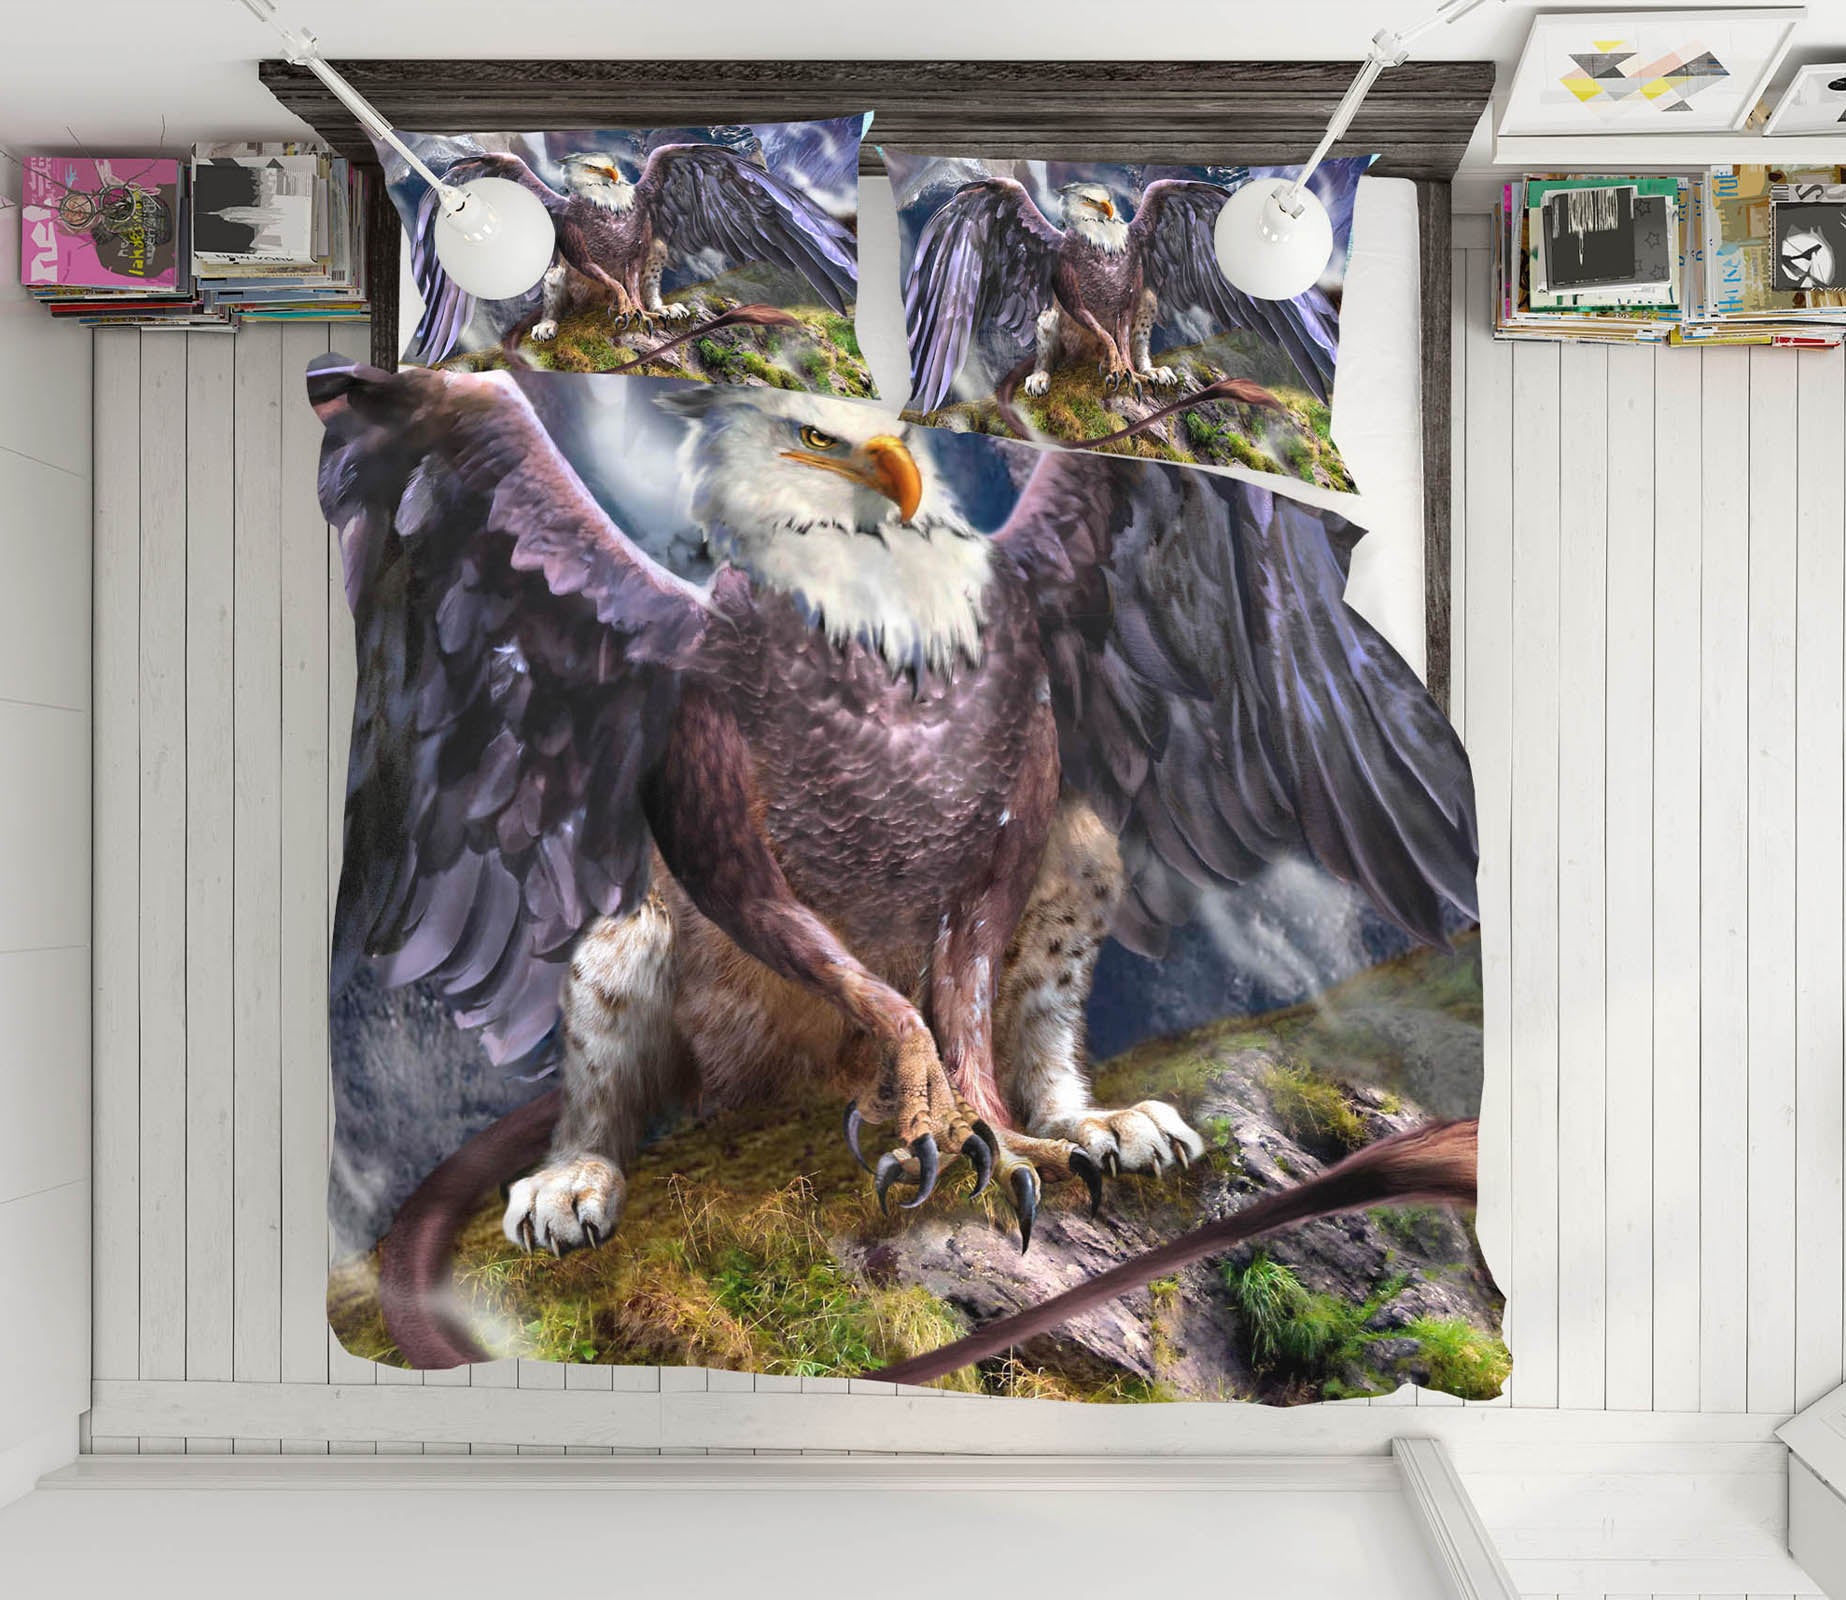 3D Eagle Wings 8344 Ruth Thompson Bedding Bed Pillowcases Quilt Cover Duvet Cover